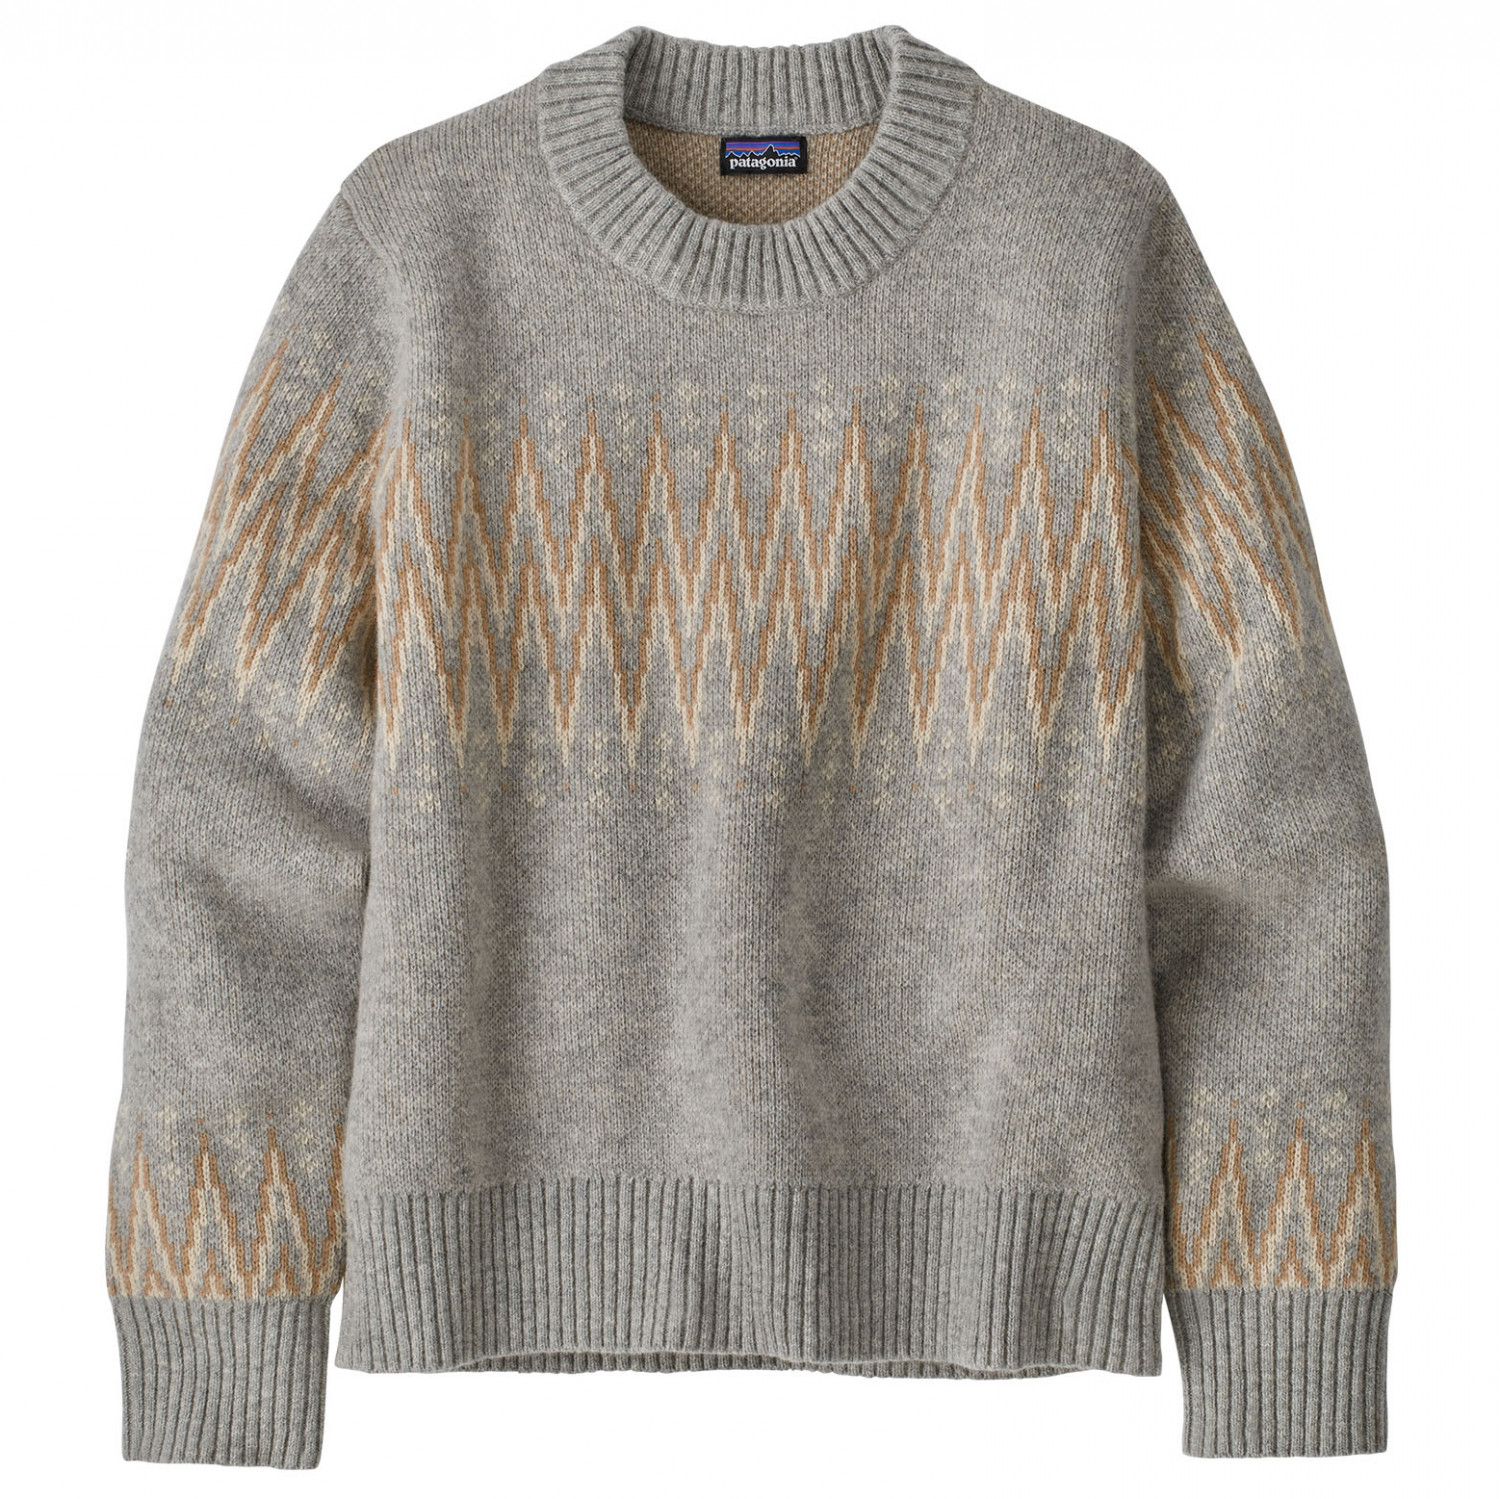 Patagonia - Women's Recycled Wool Crewneck Sweater - Wollpullover